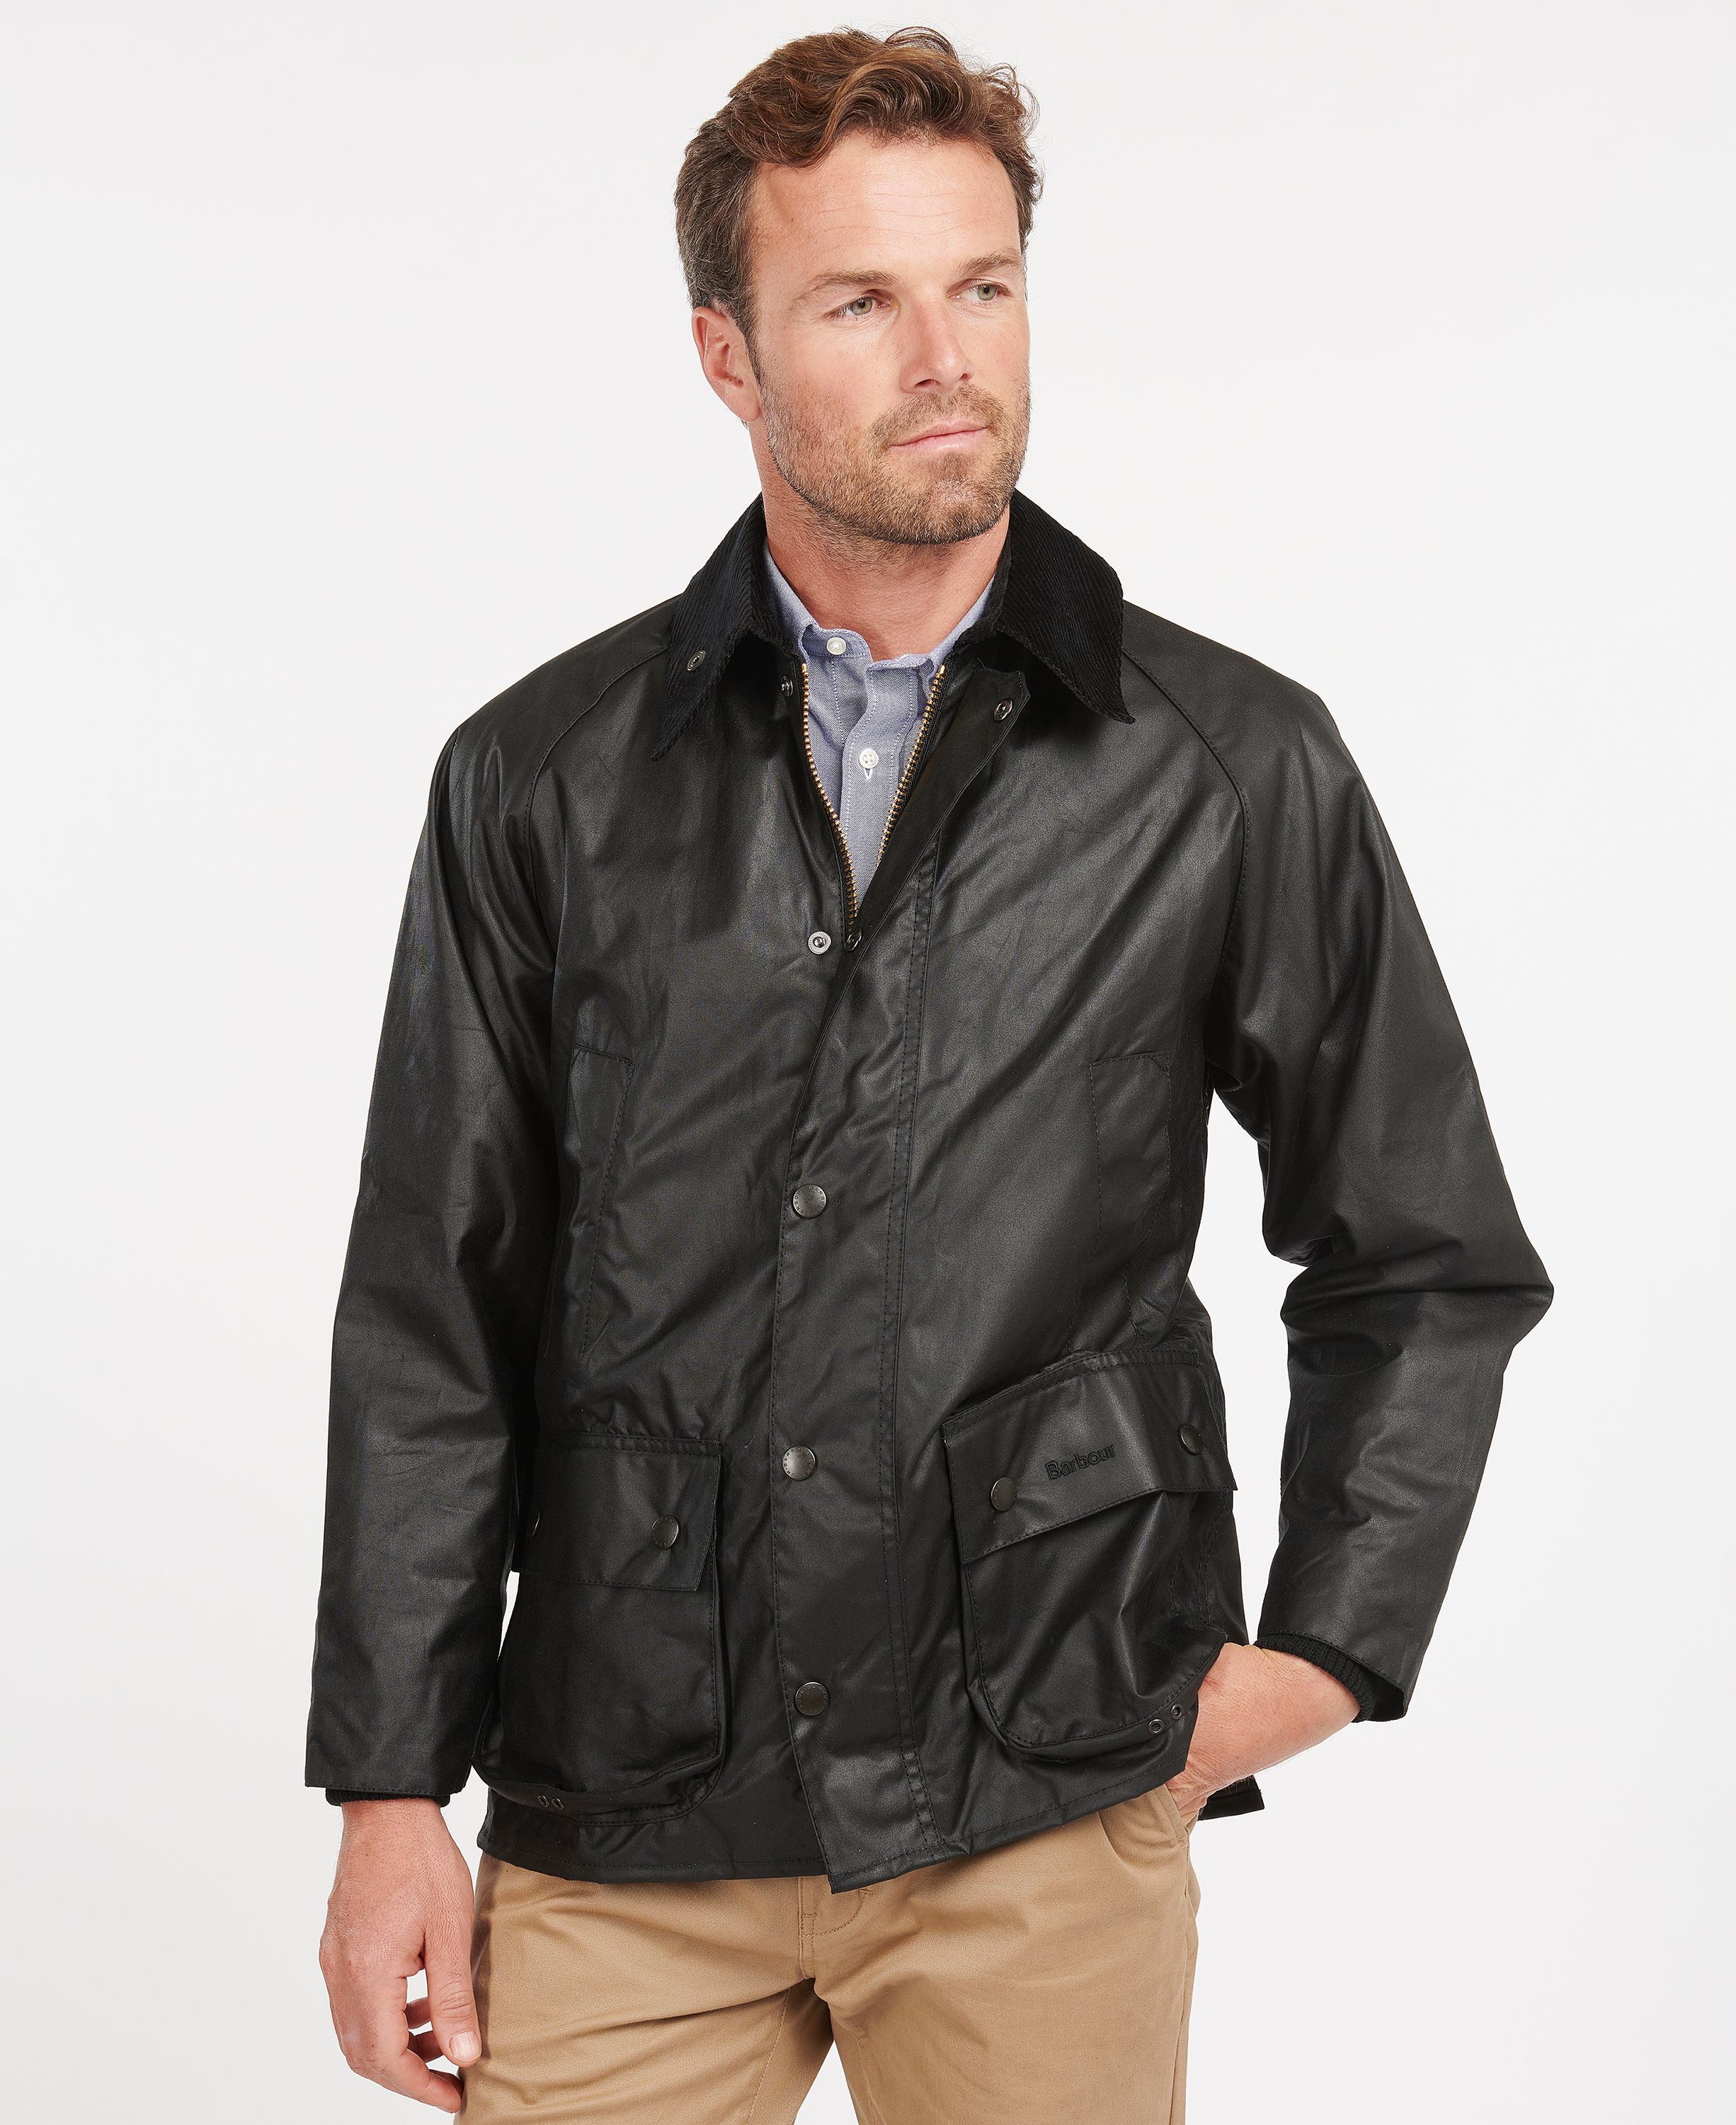 Wax Jackets For Men or Women Design History